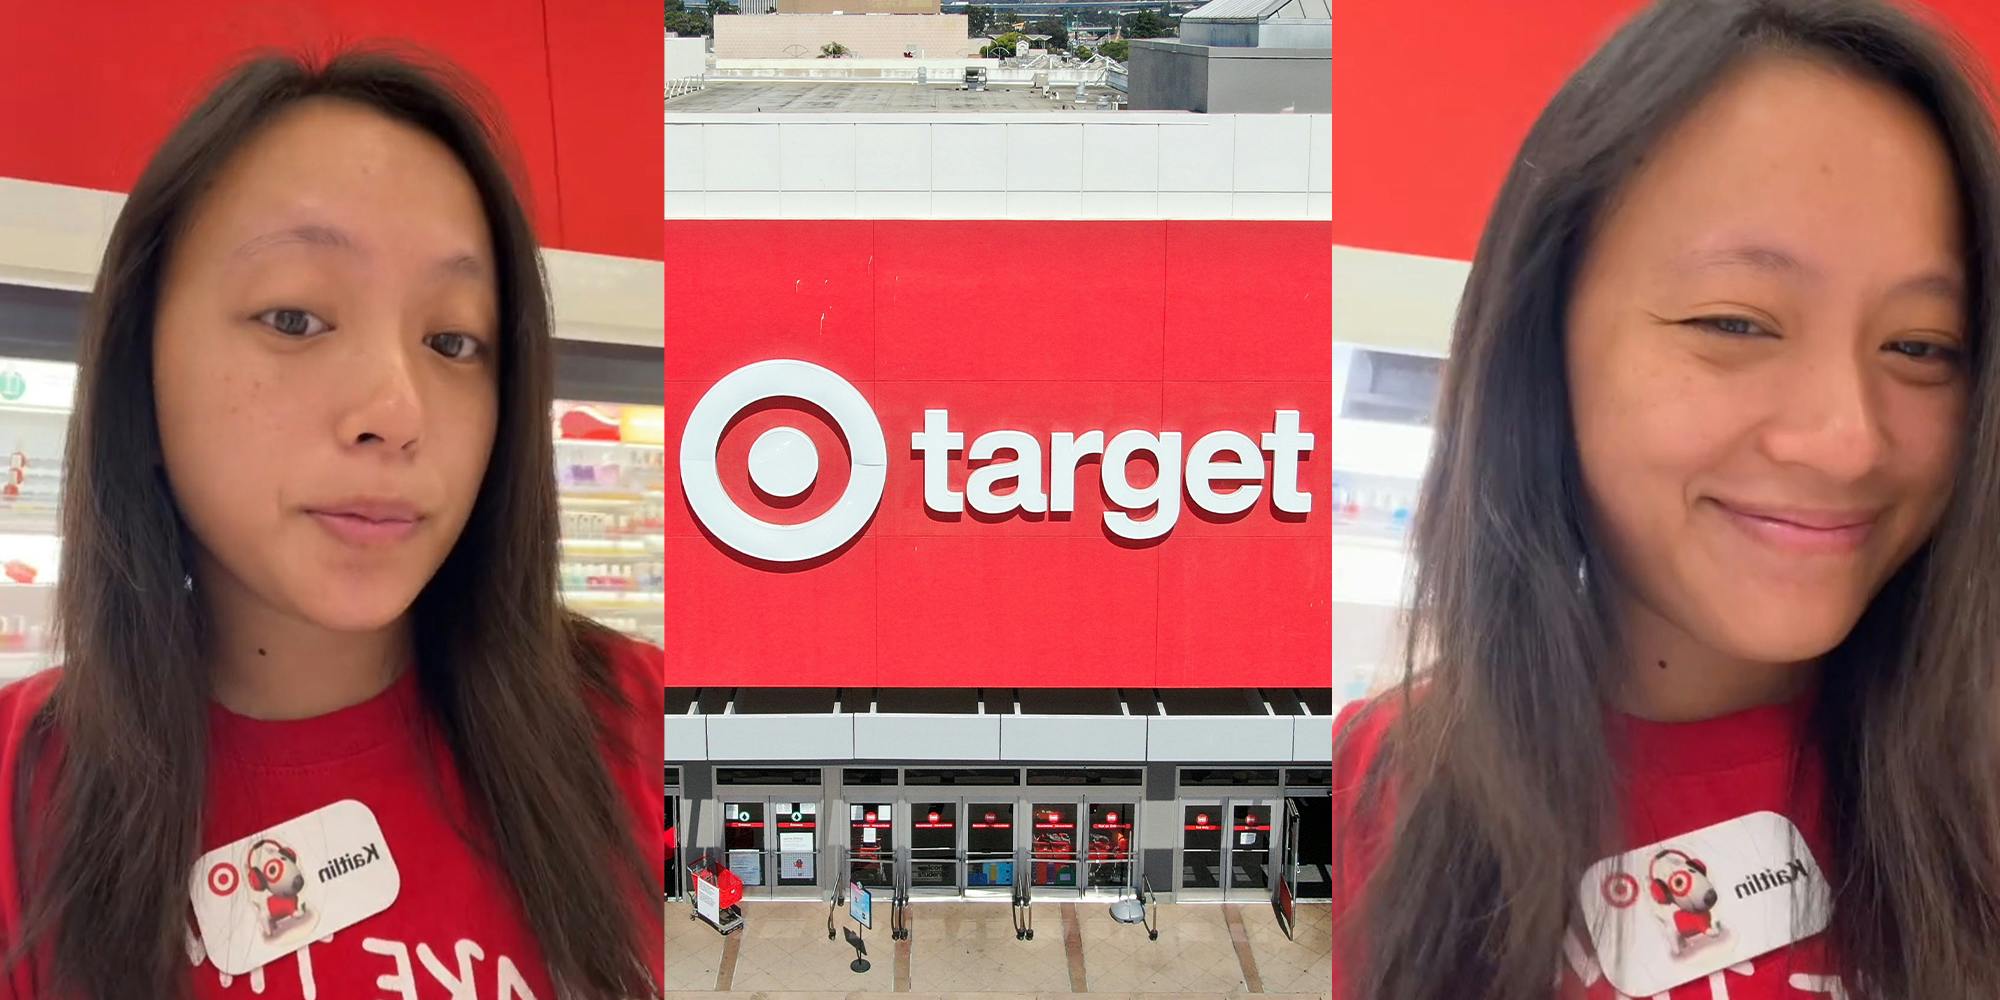 Worker shares 'best' and 'worst' positions to work at Target